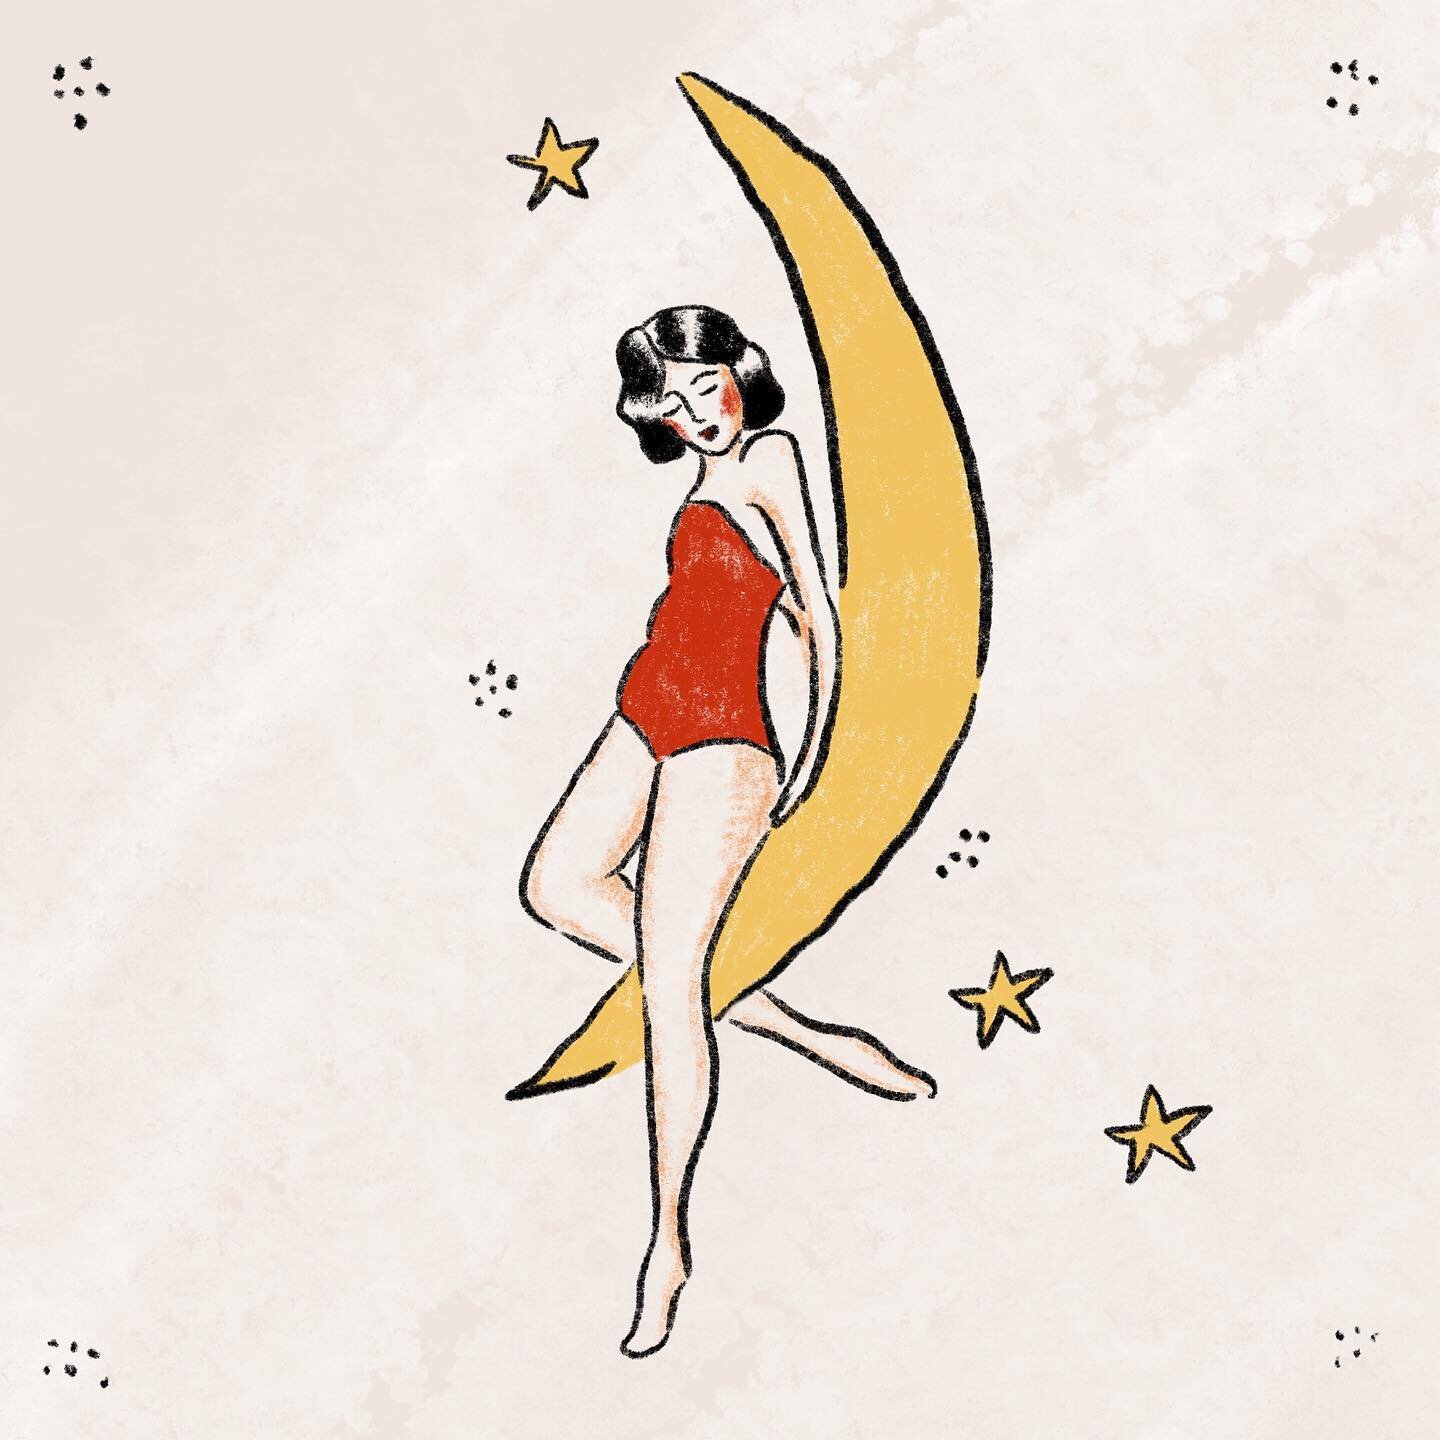 moon lady&hellip;it has been awhile since I posted since I&rsquo;ve got a lot of other cool stuff in the works&hellip;but here&rsquo;s a little something in the meantime!!!
.
.
.
.
.
.
#illustration #drawing #art #drawingoftheday #illustrator #artist